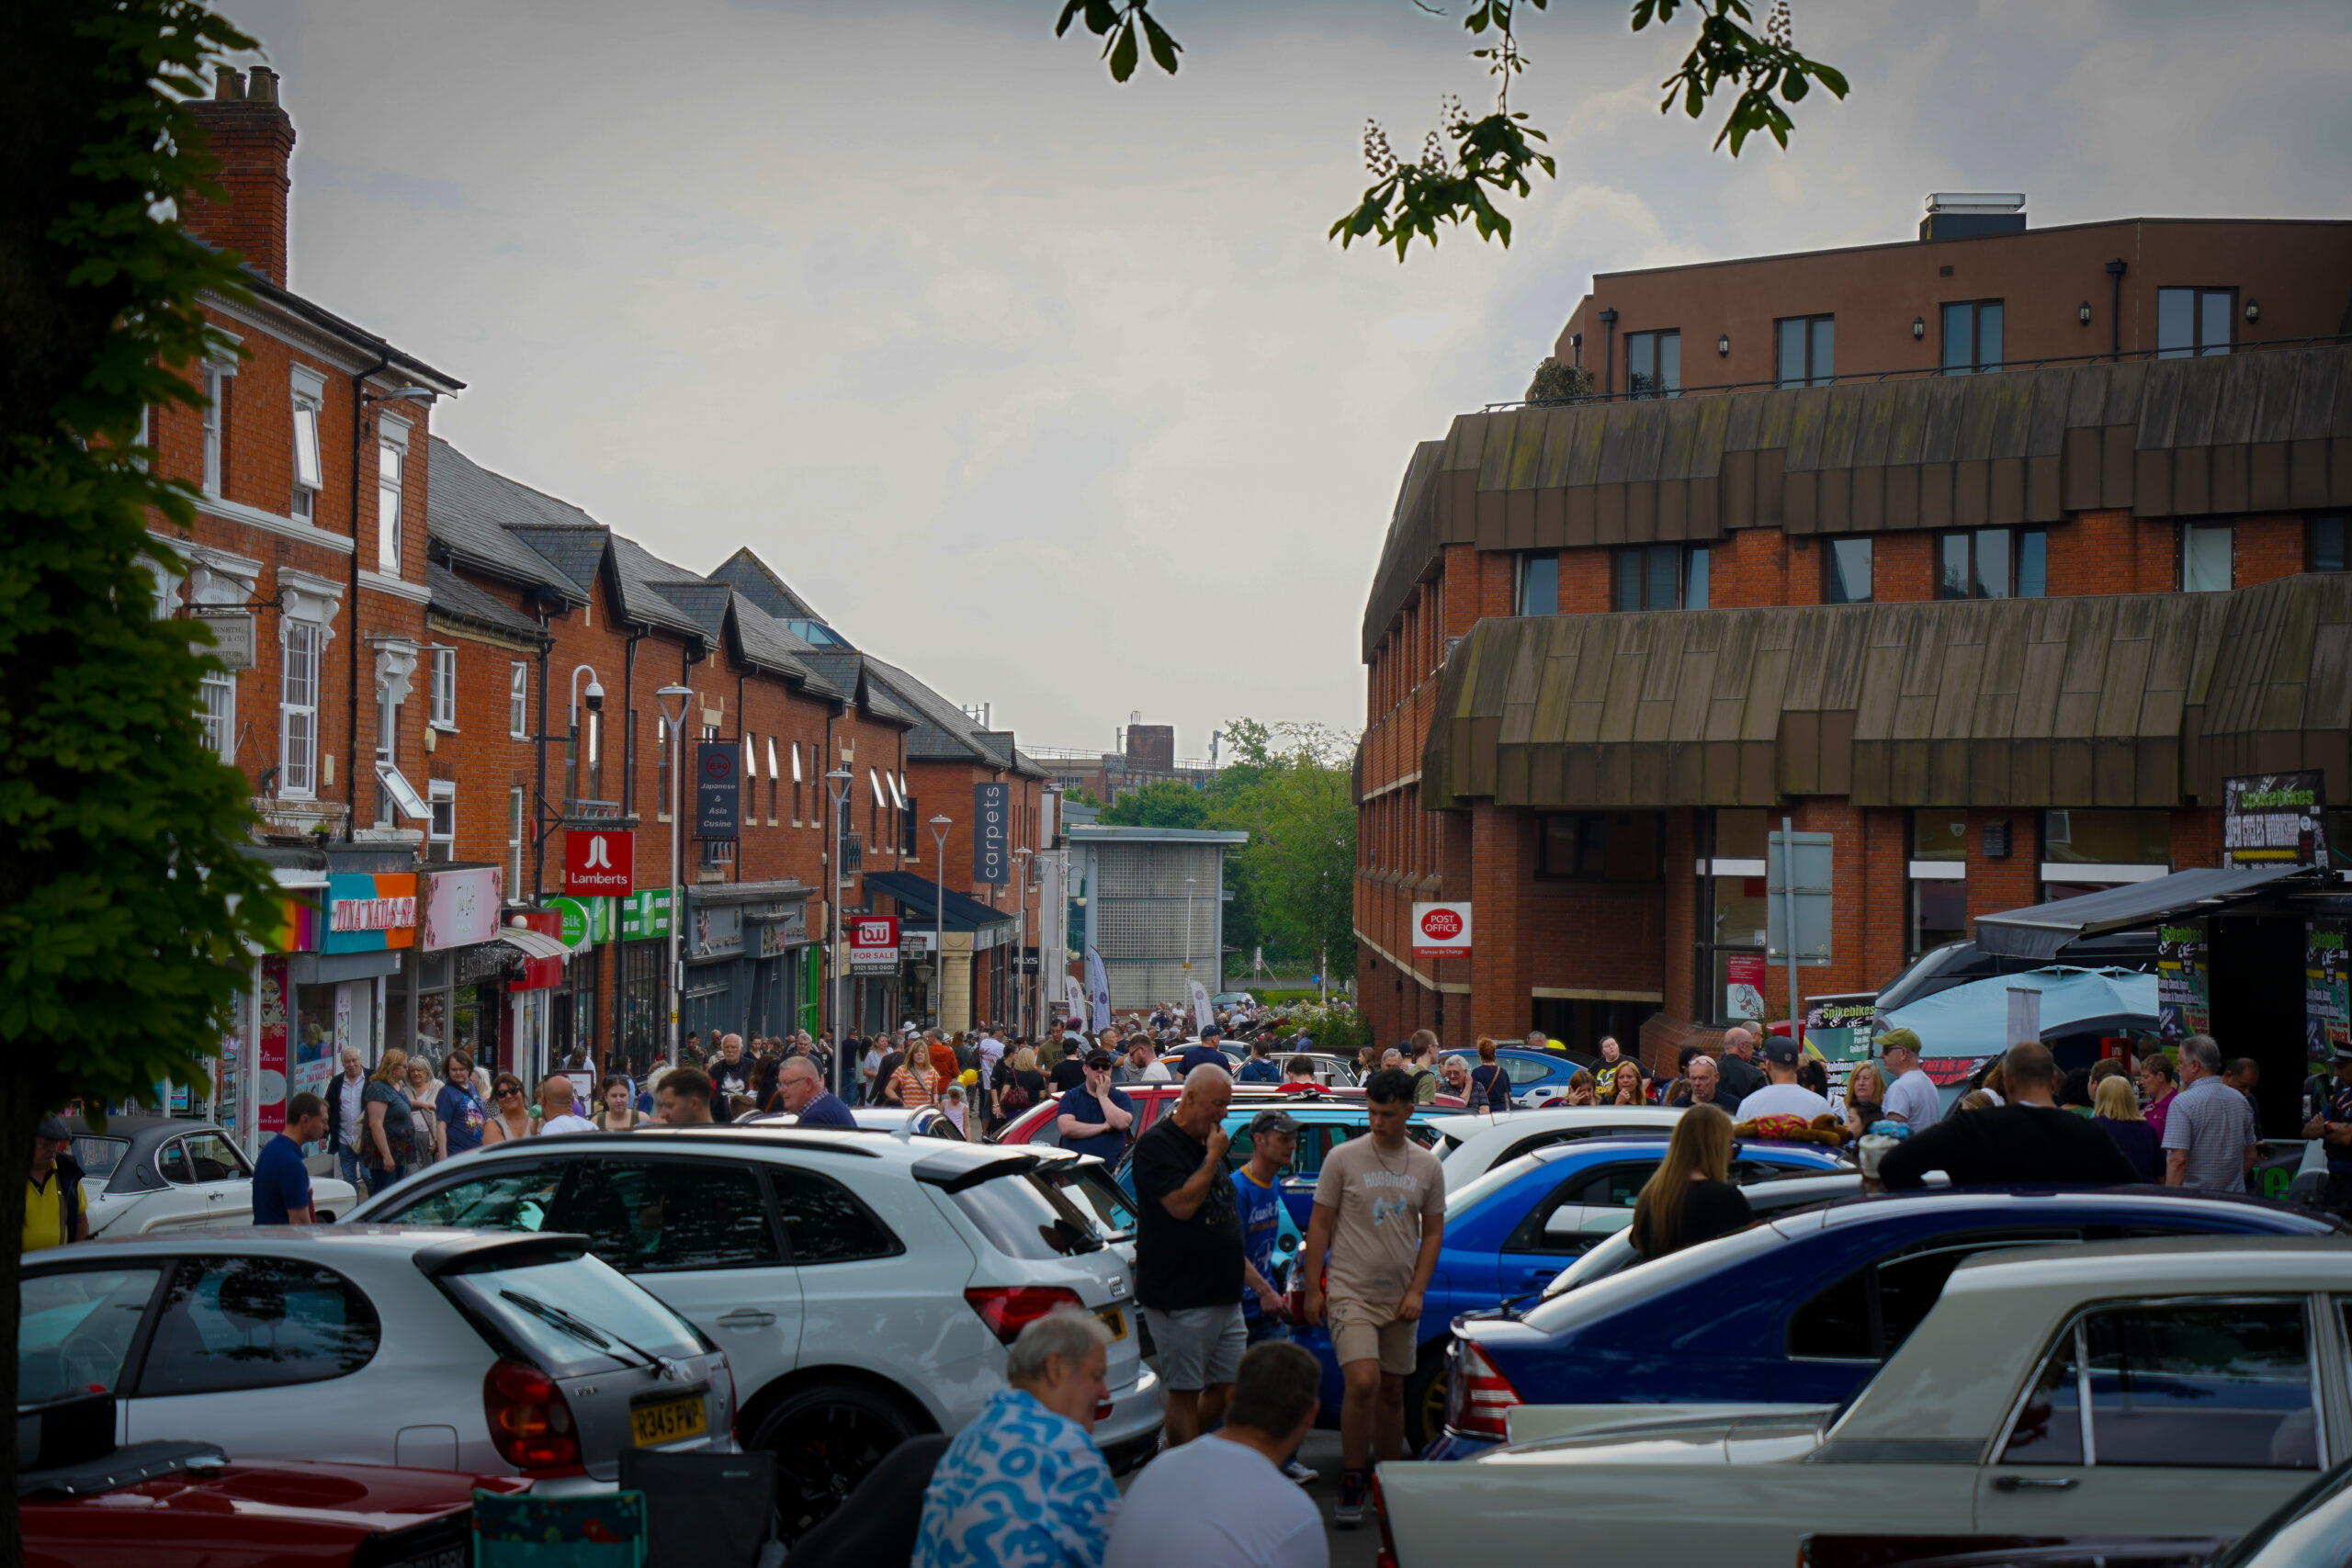 Redditch Classic Motor Show Wraps Up with Unprecedented Success in Redditch